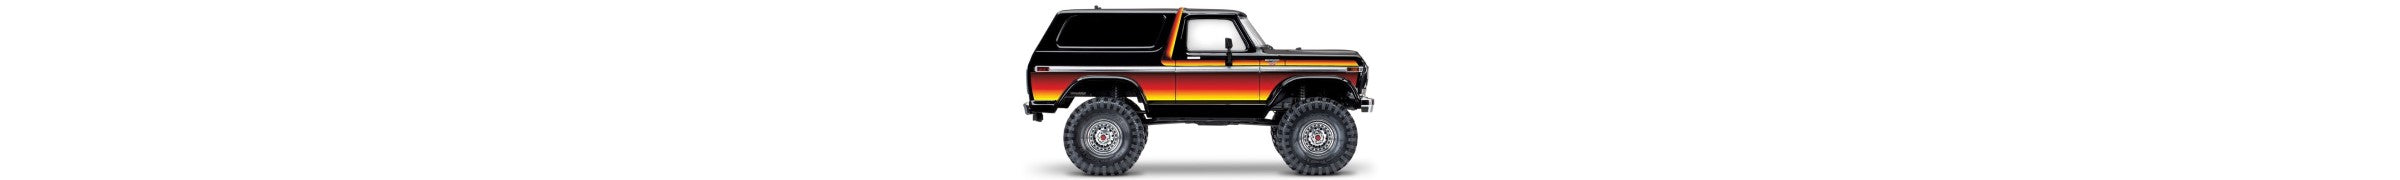 Parts For 82046-4 Traxxas TRX-4 1979 Ford Bronco 1/10 4WD